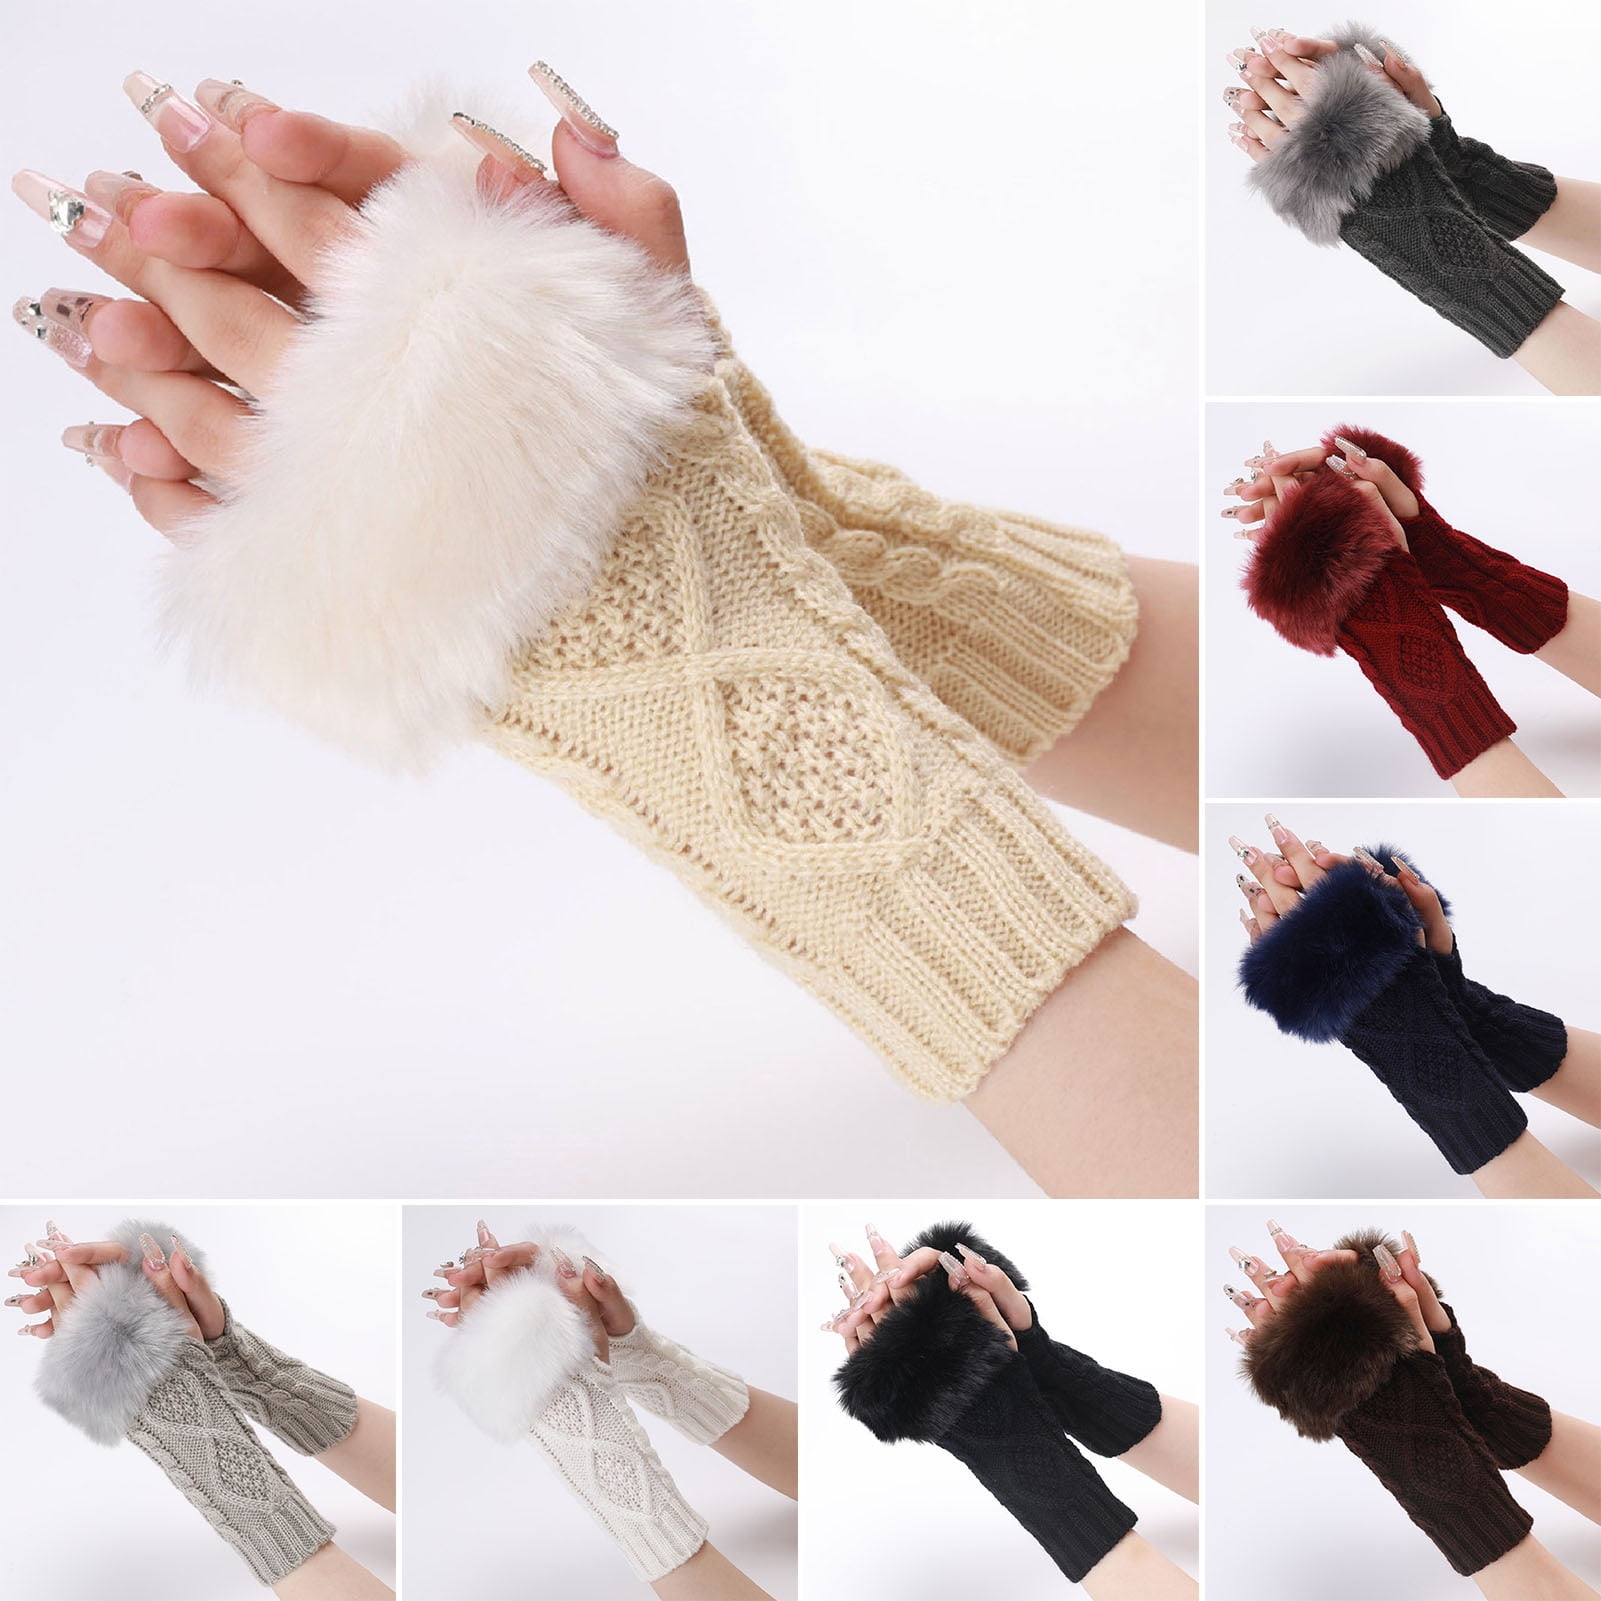 GROFRY 1 Pair Knitted Gloves Fuzzy Fingerless Stretchy Thumb Hole